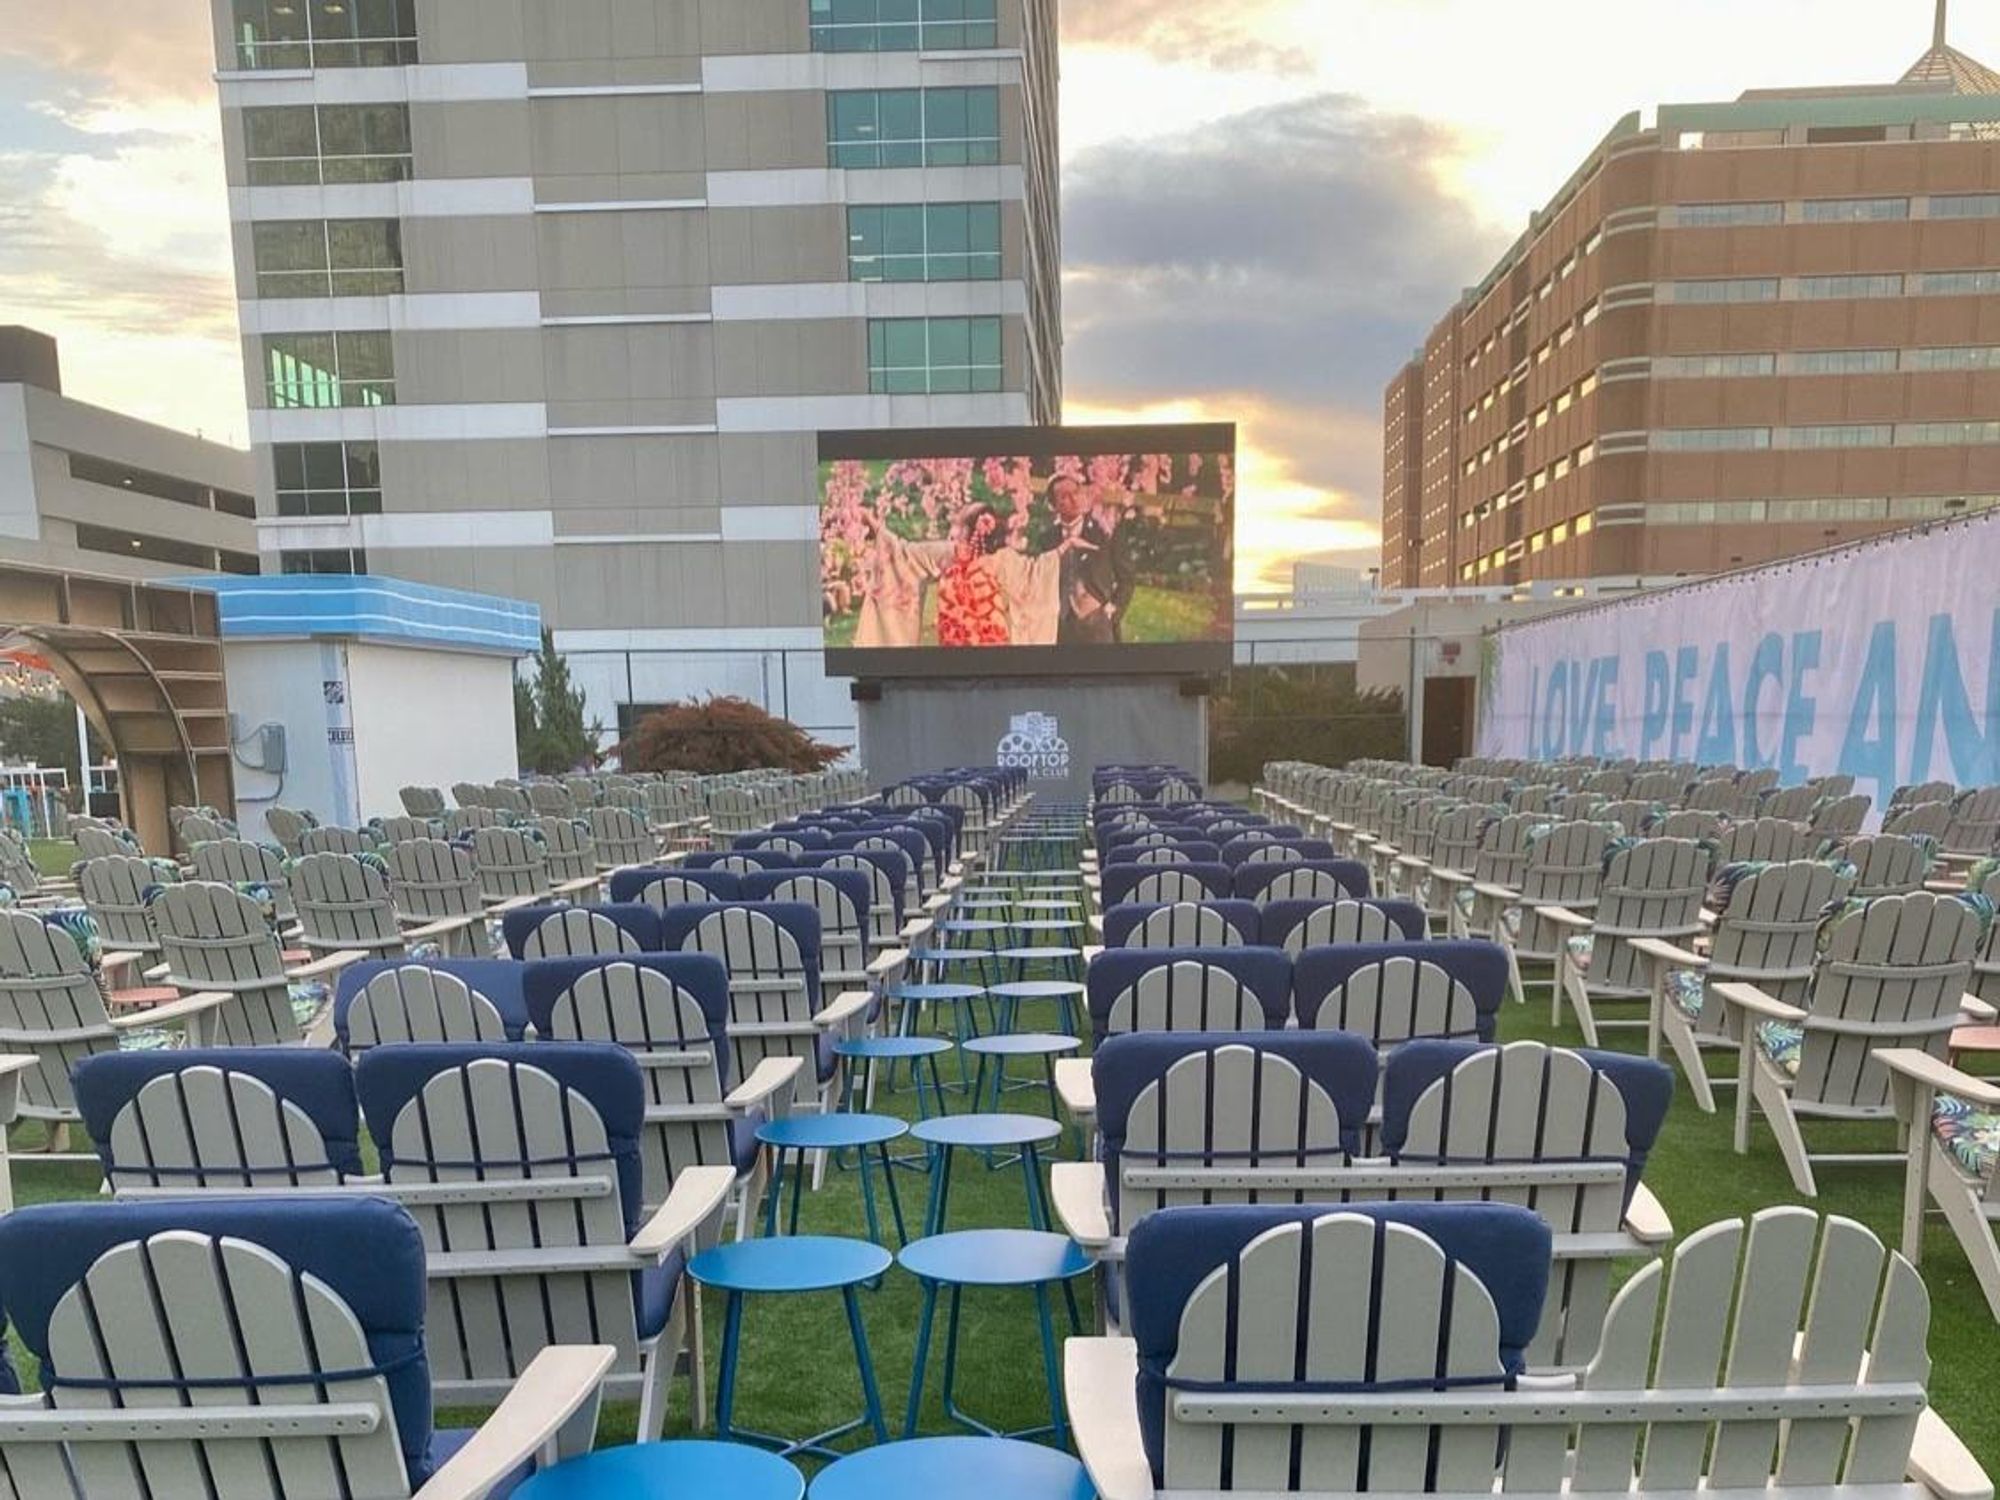 8 essential tips for sky-high fun at Fort Worths new Rooftop Cinema ...